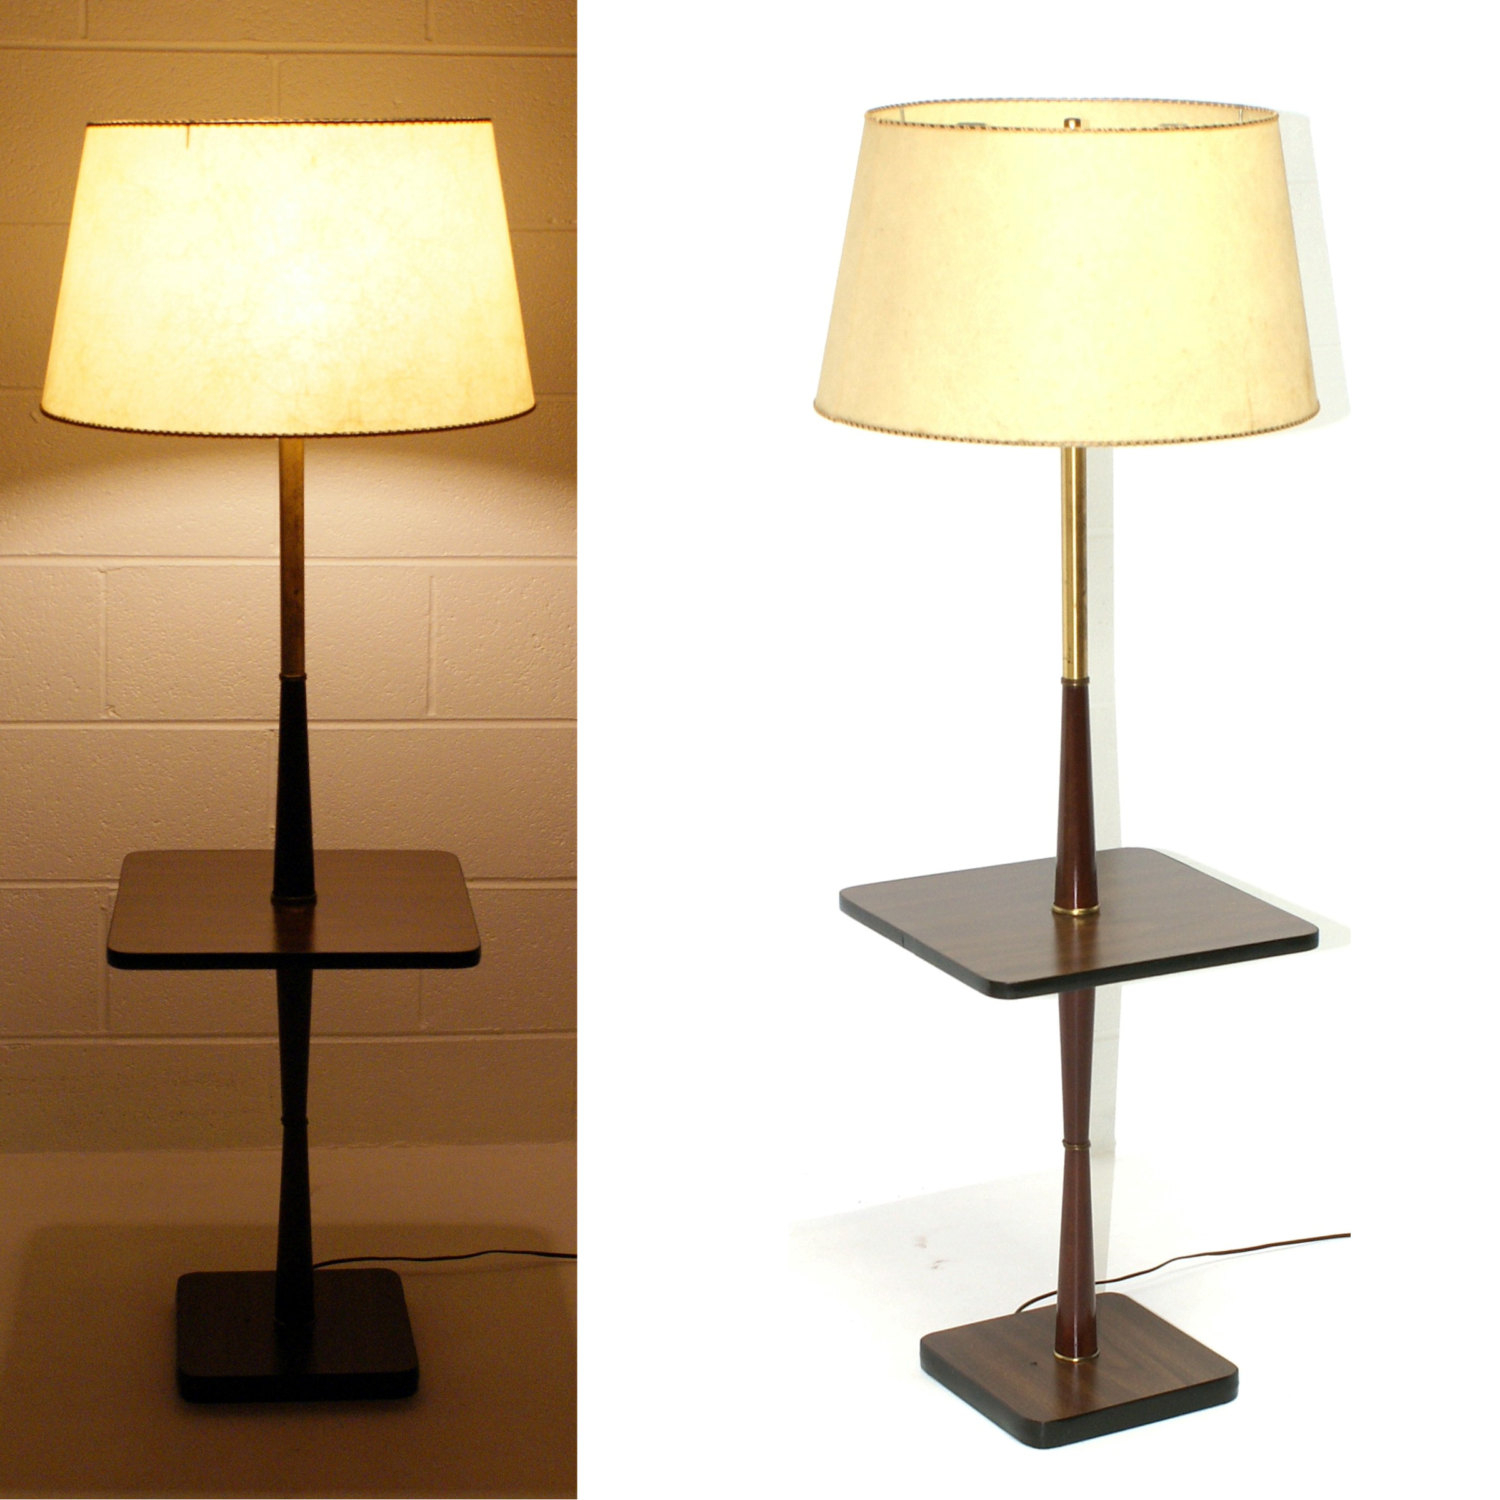 Best Combination For Your Floor Lamp With Table Attached with sizing 1500 X 1500